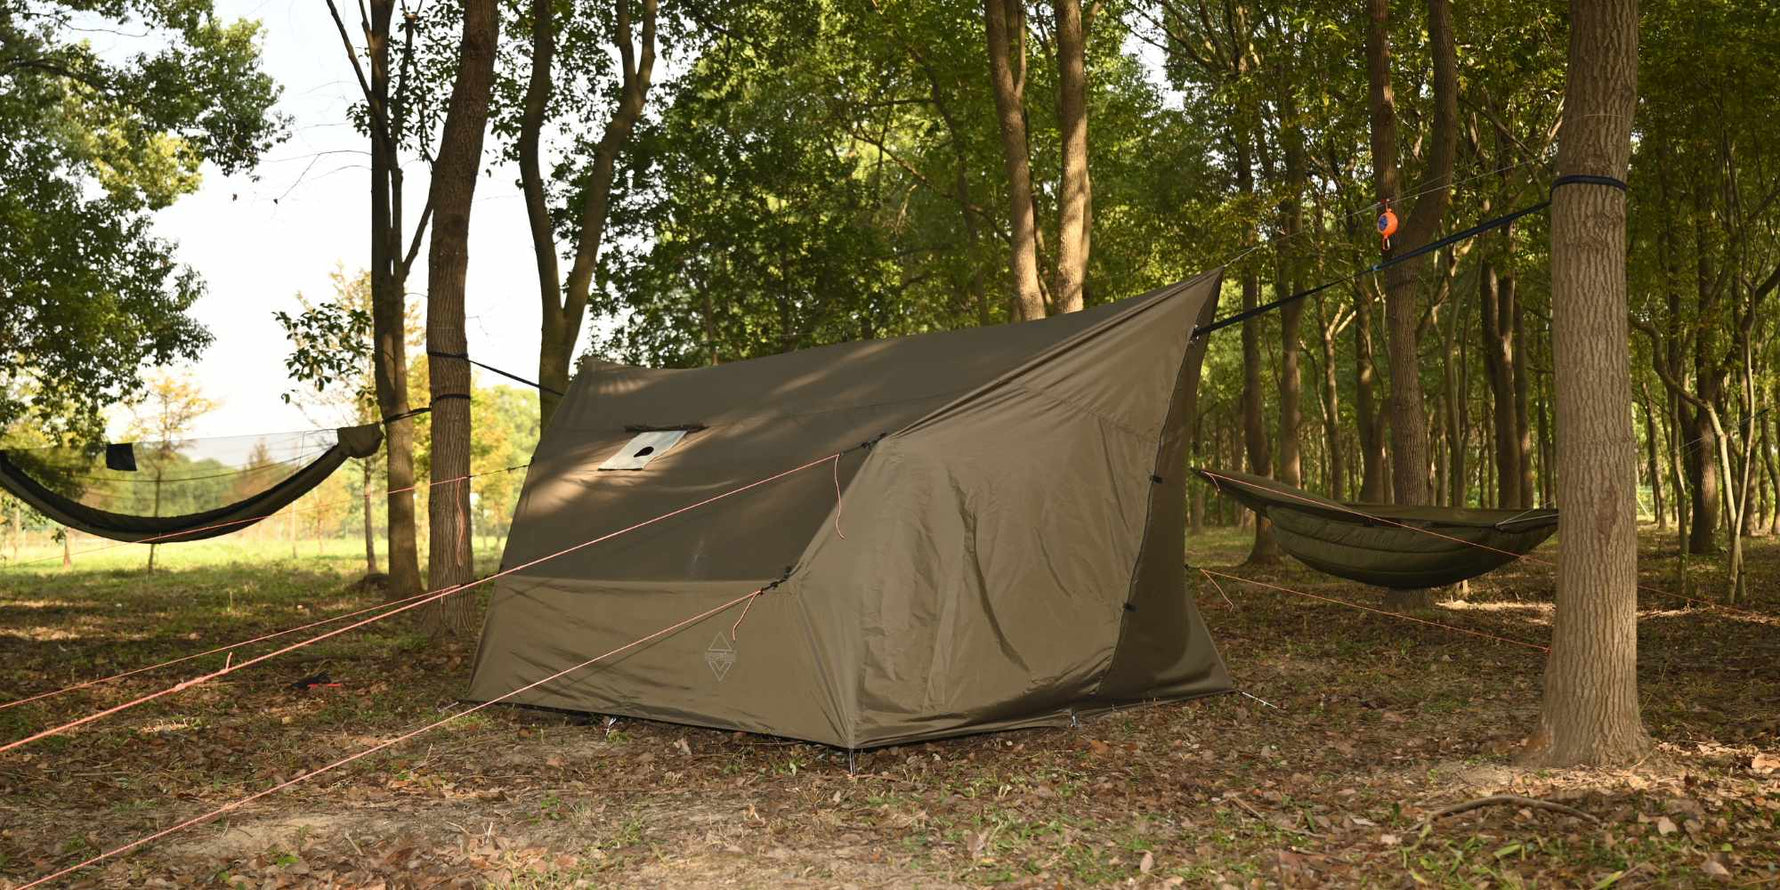 Most Popular Camping Hammocks for Outdoors | Onewind Outdoors